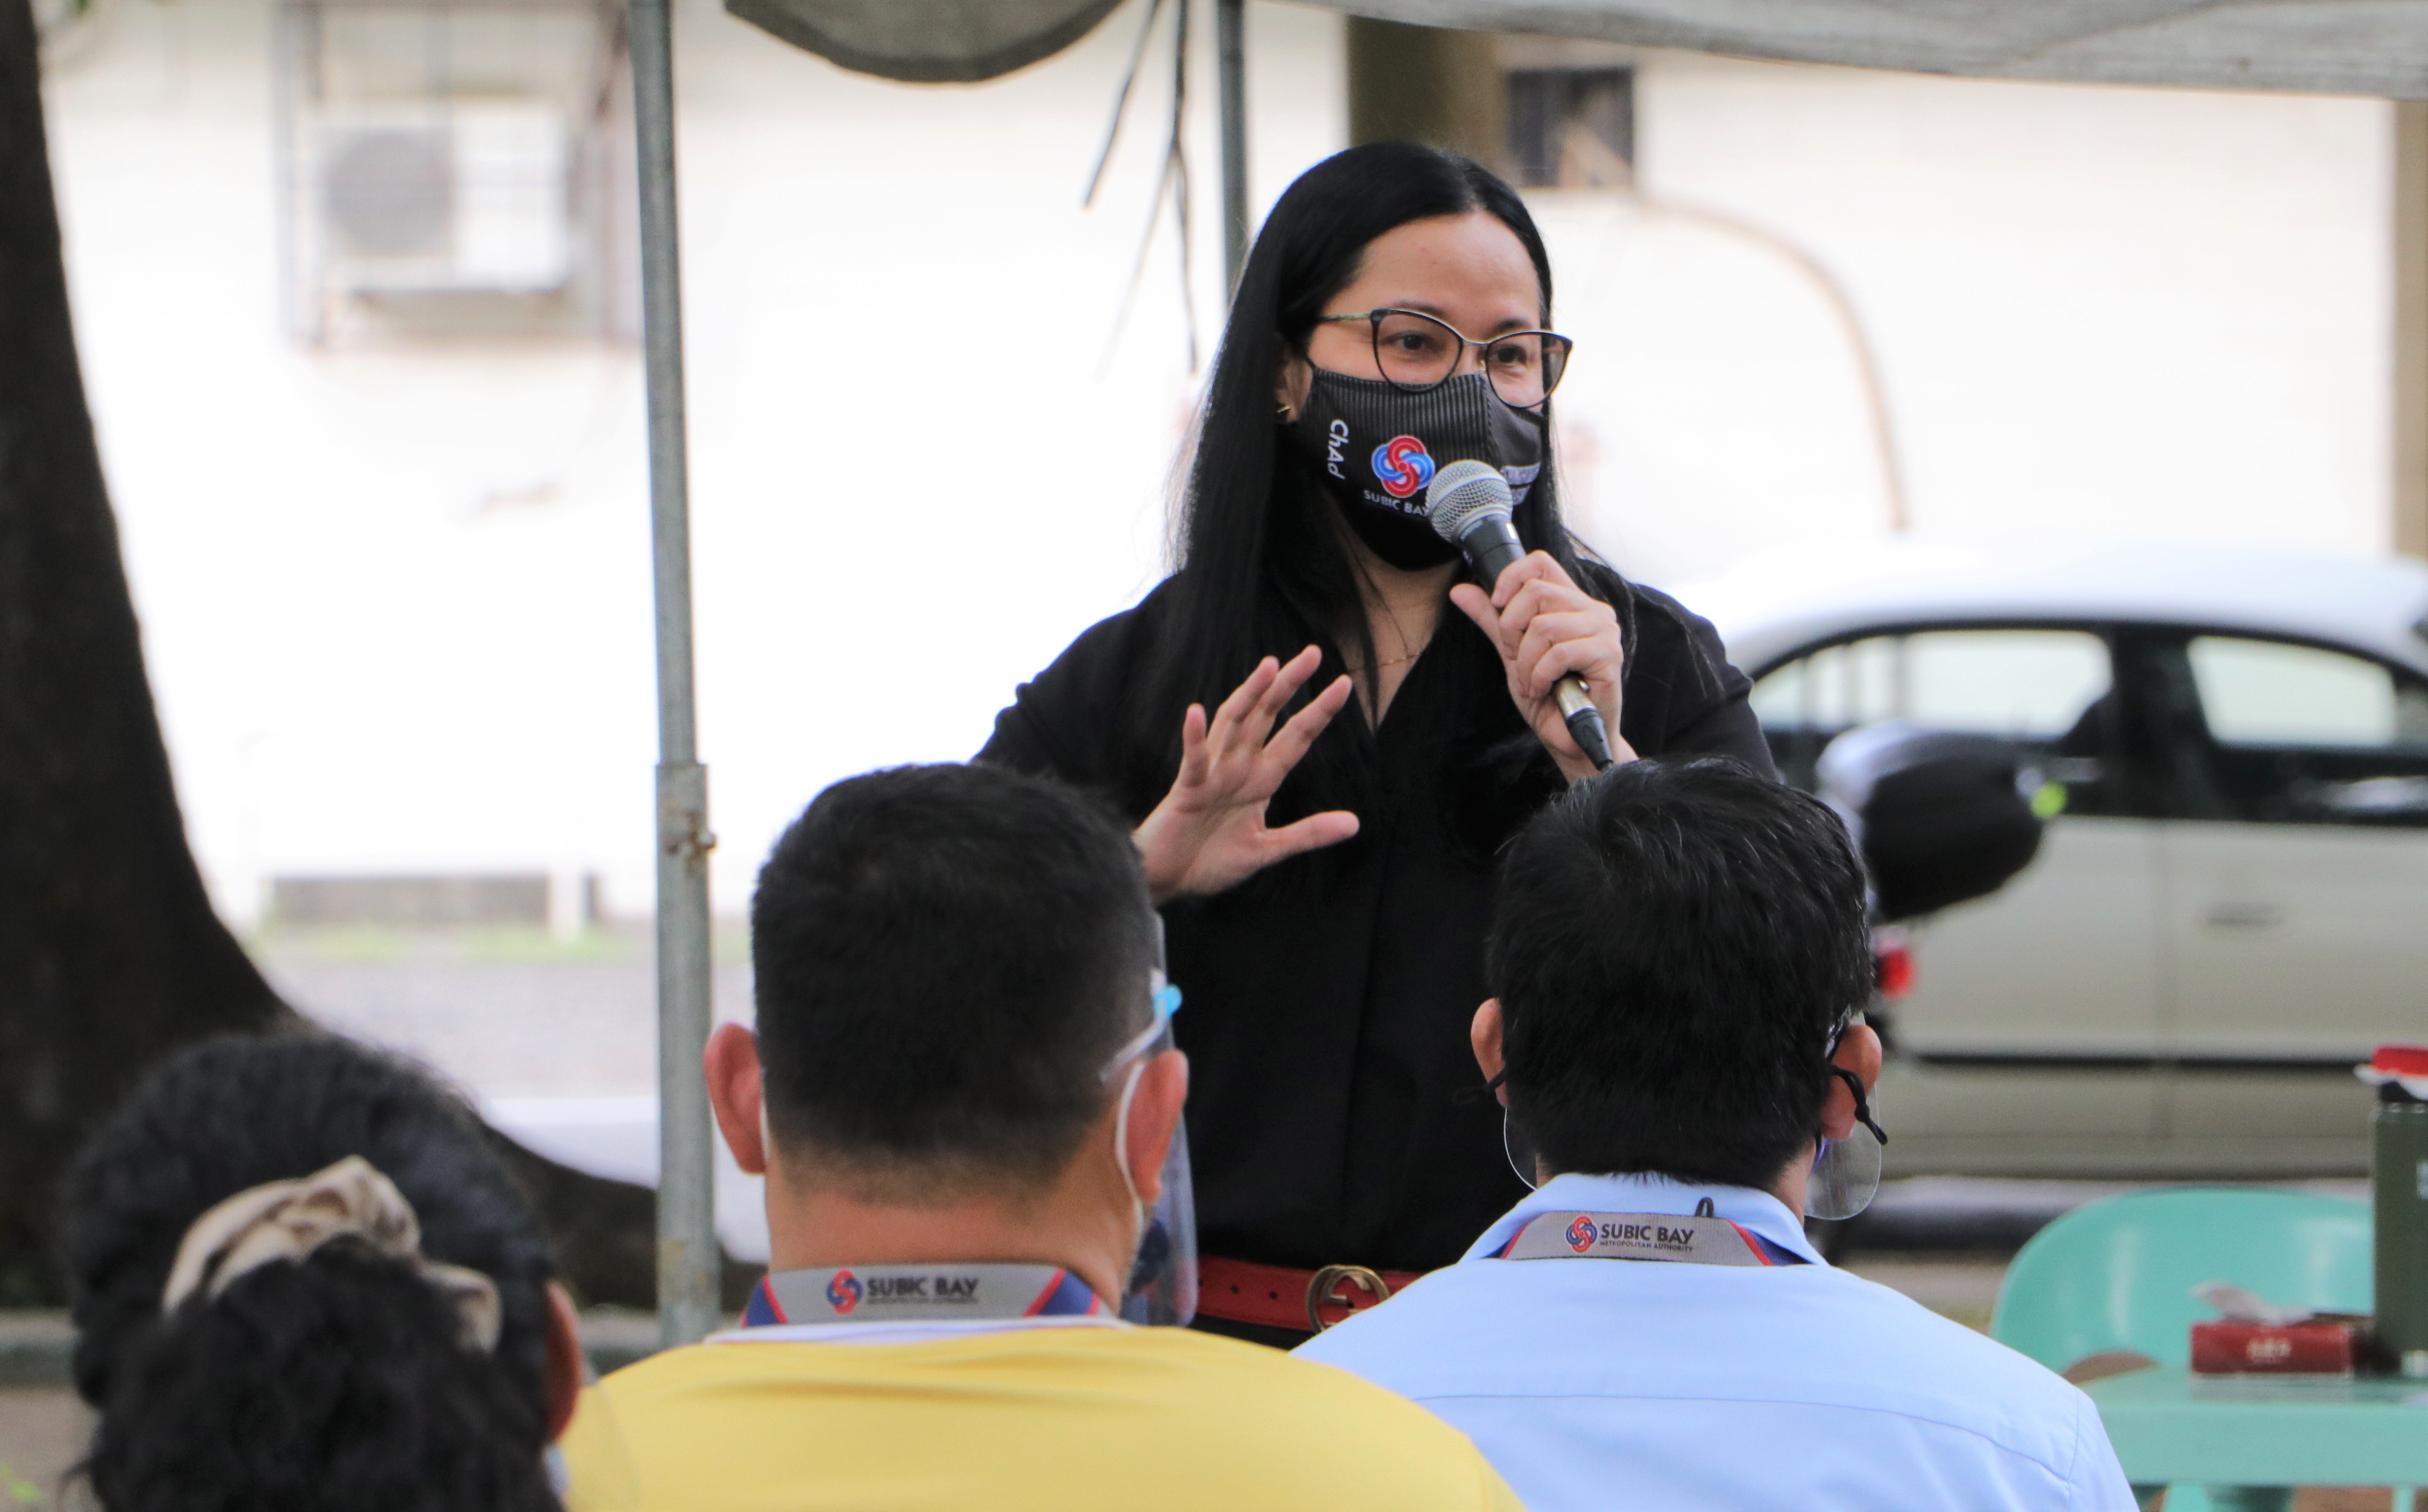 SBMA Chairman and Administrator Wilma T. Eisma discusses health safety protocols in the workplace with SBMA employees